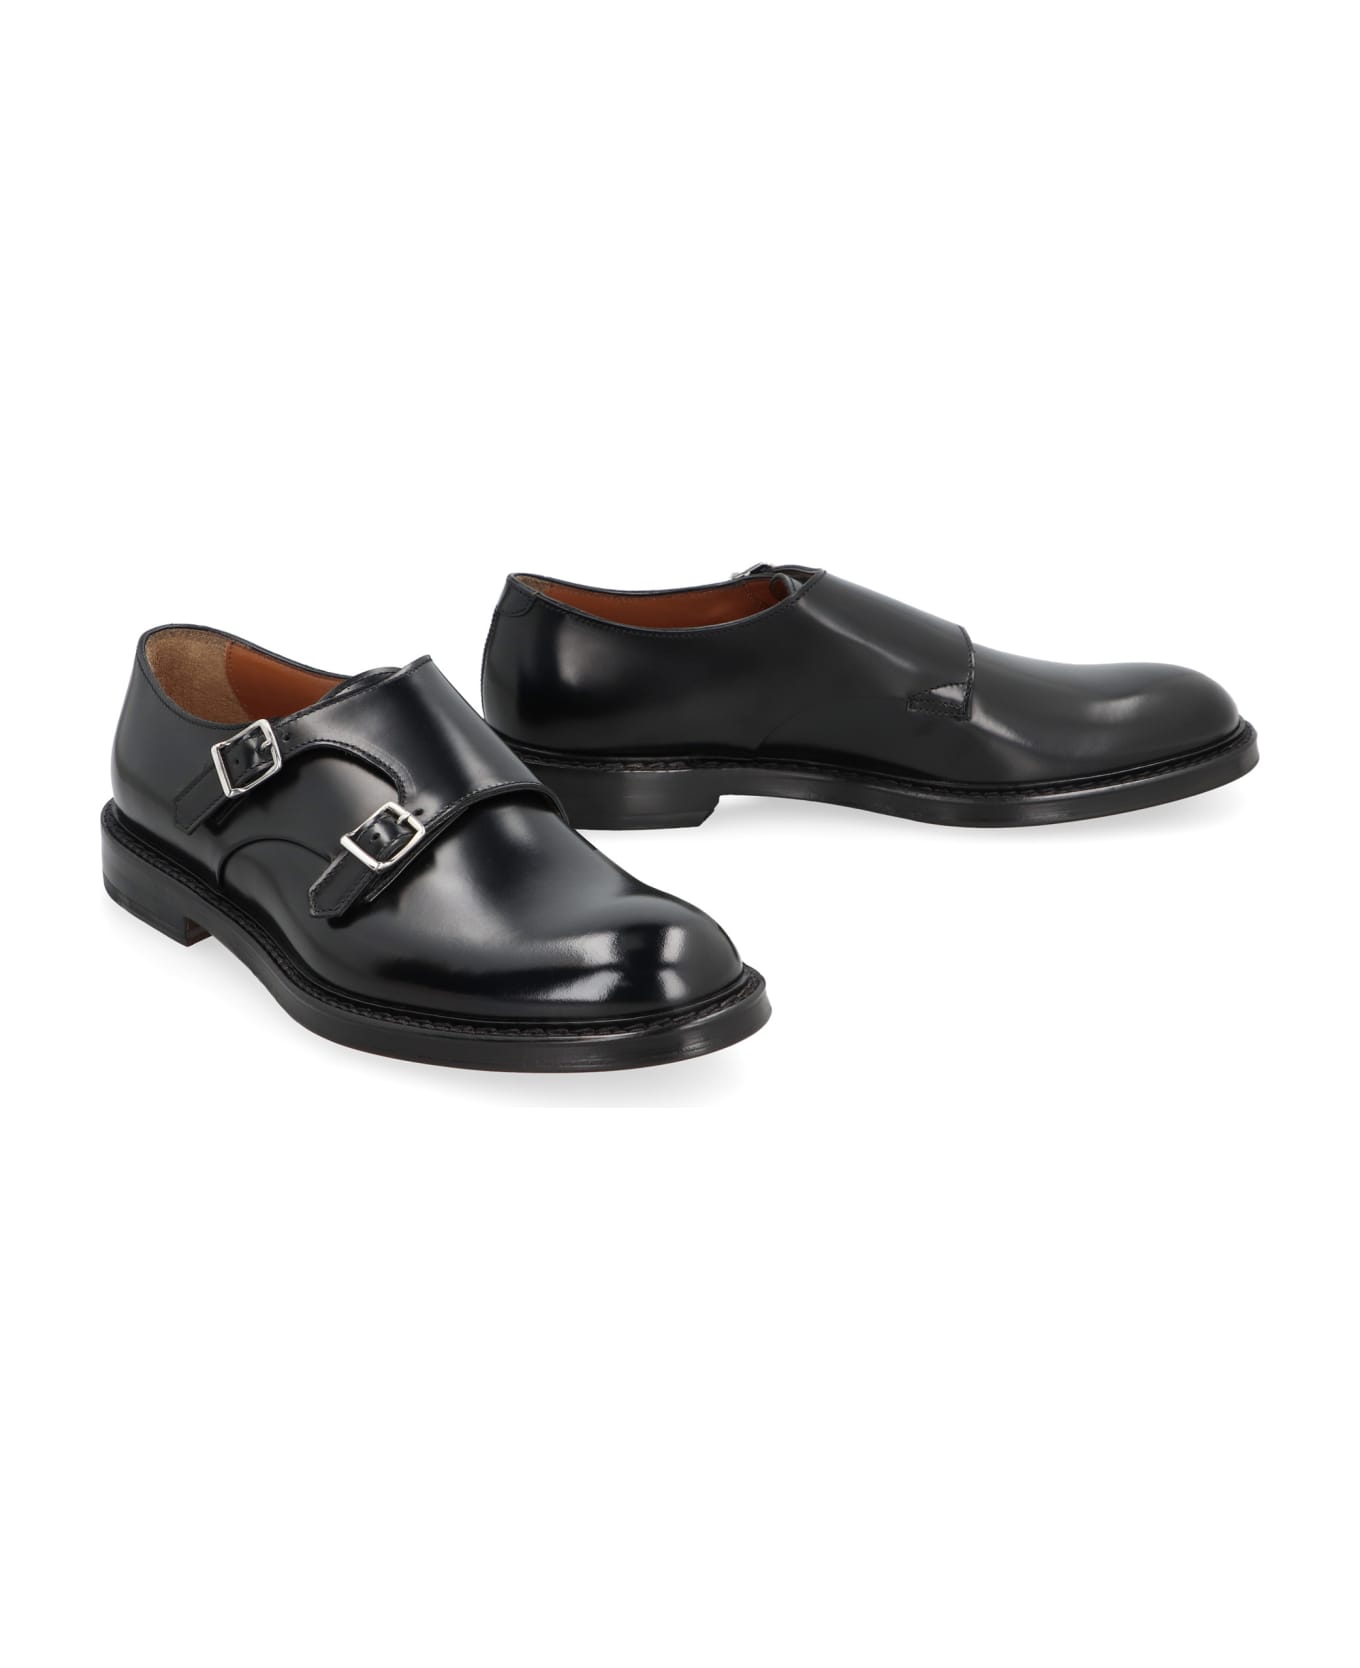 Doucal's Leather Monk-strap - black